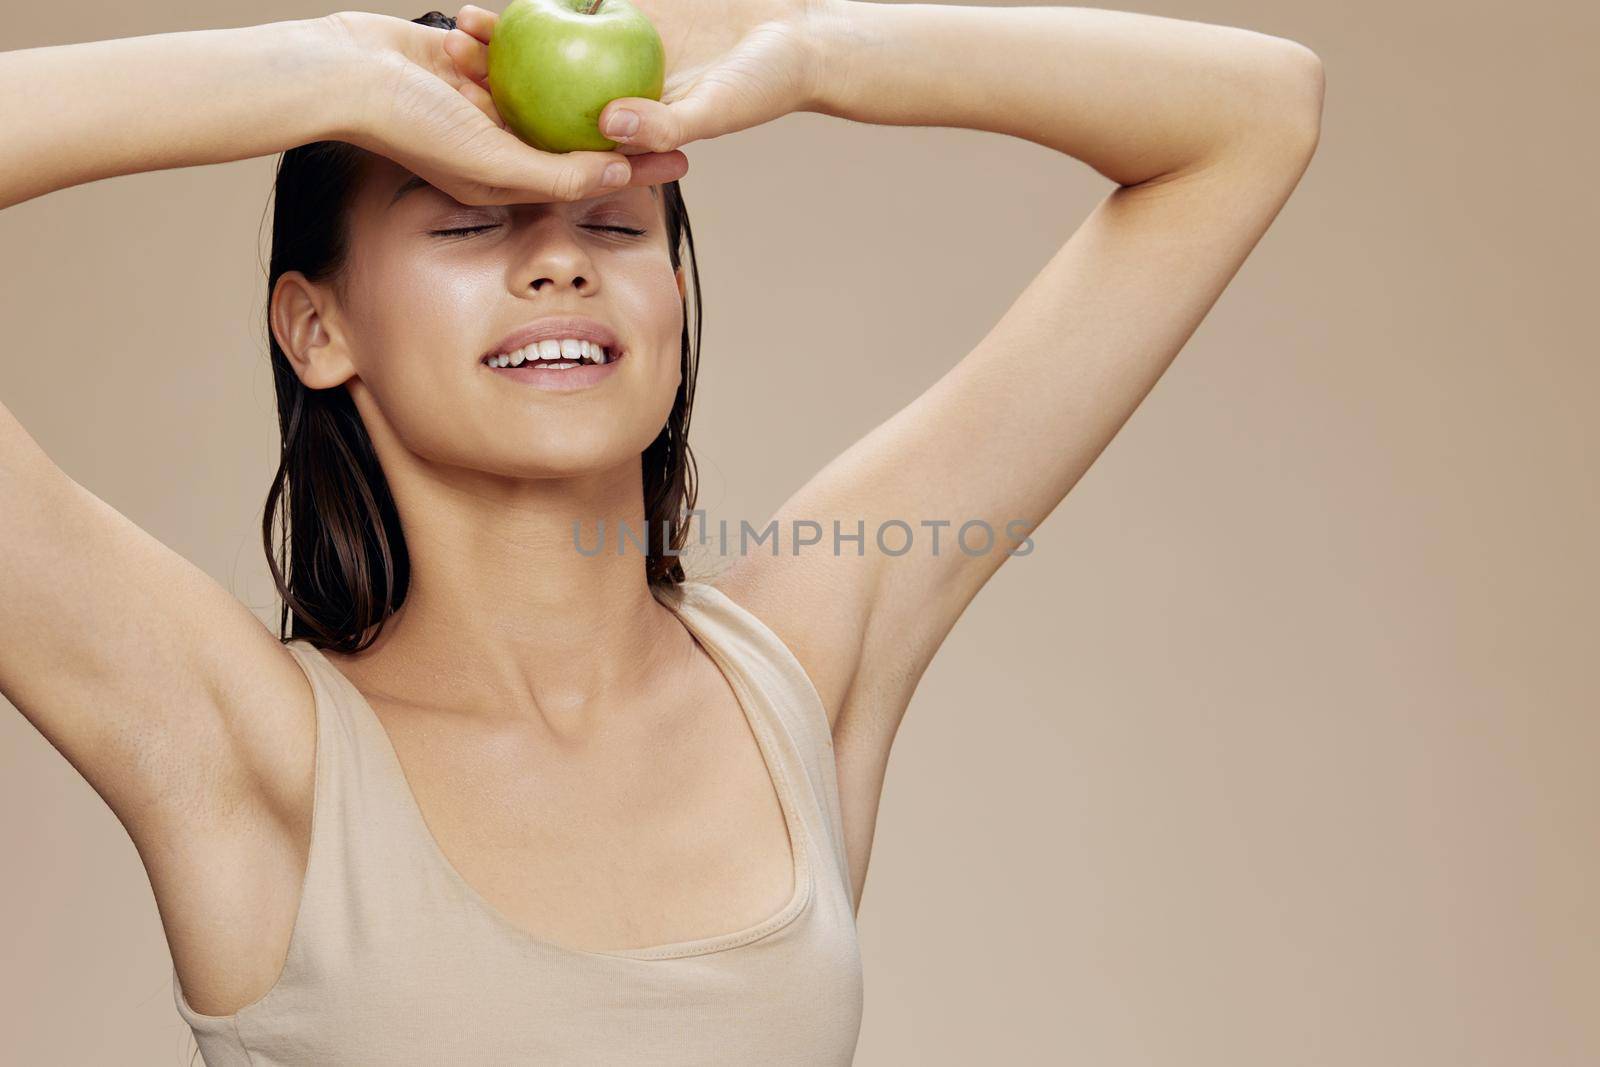 portrait woman green apple near face health isolated background by SHOTPRIME